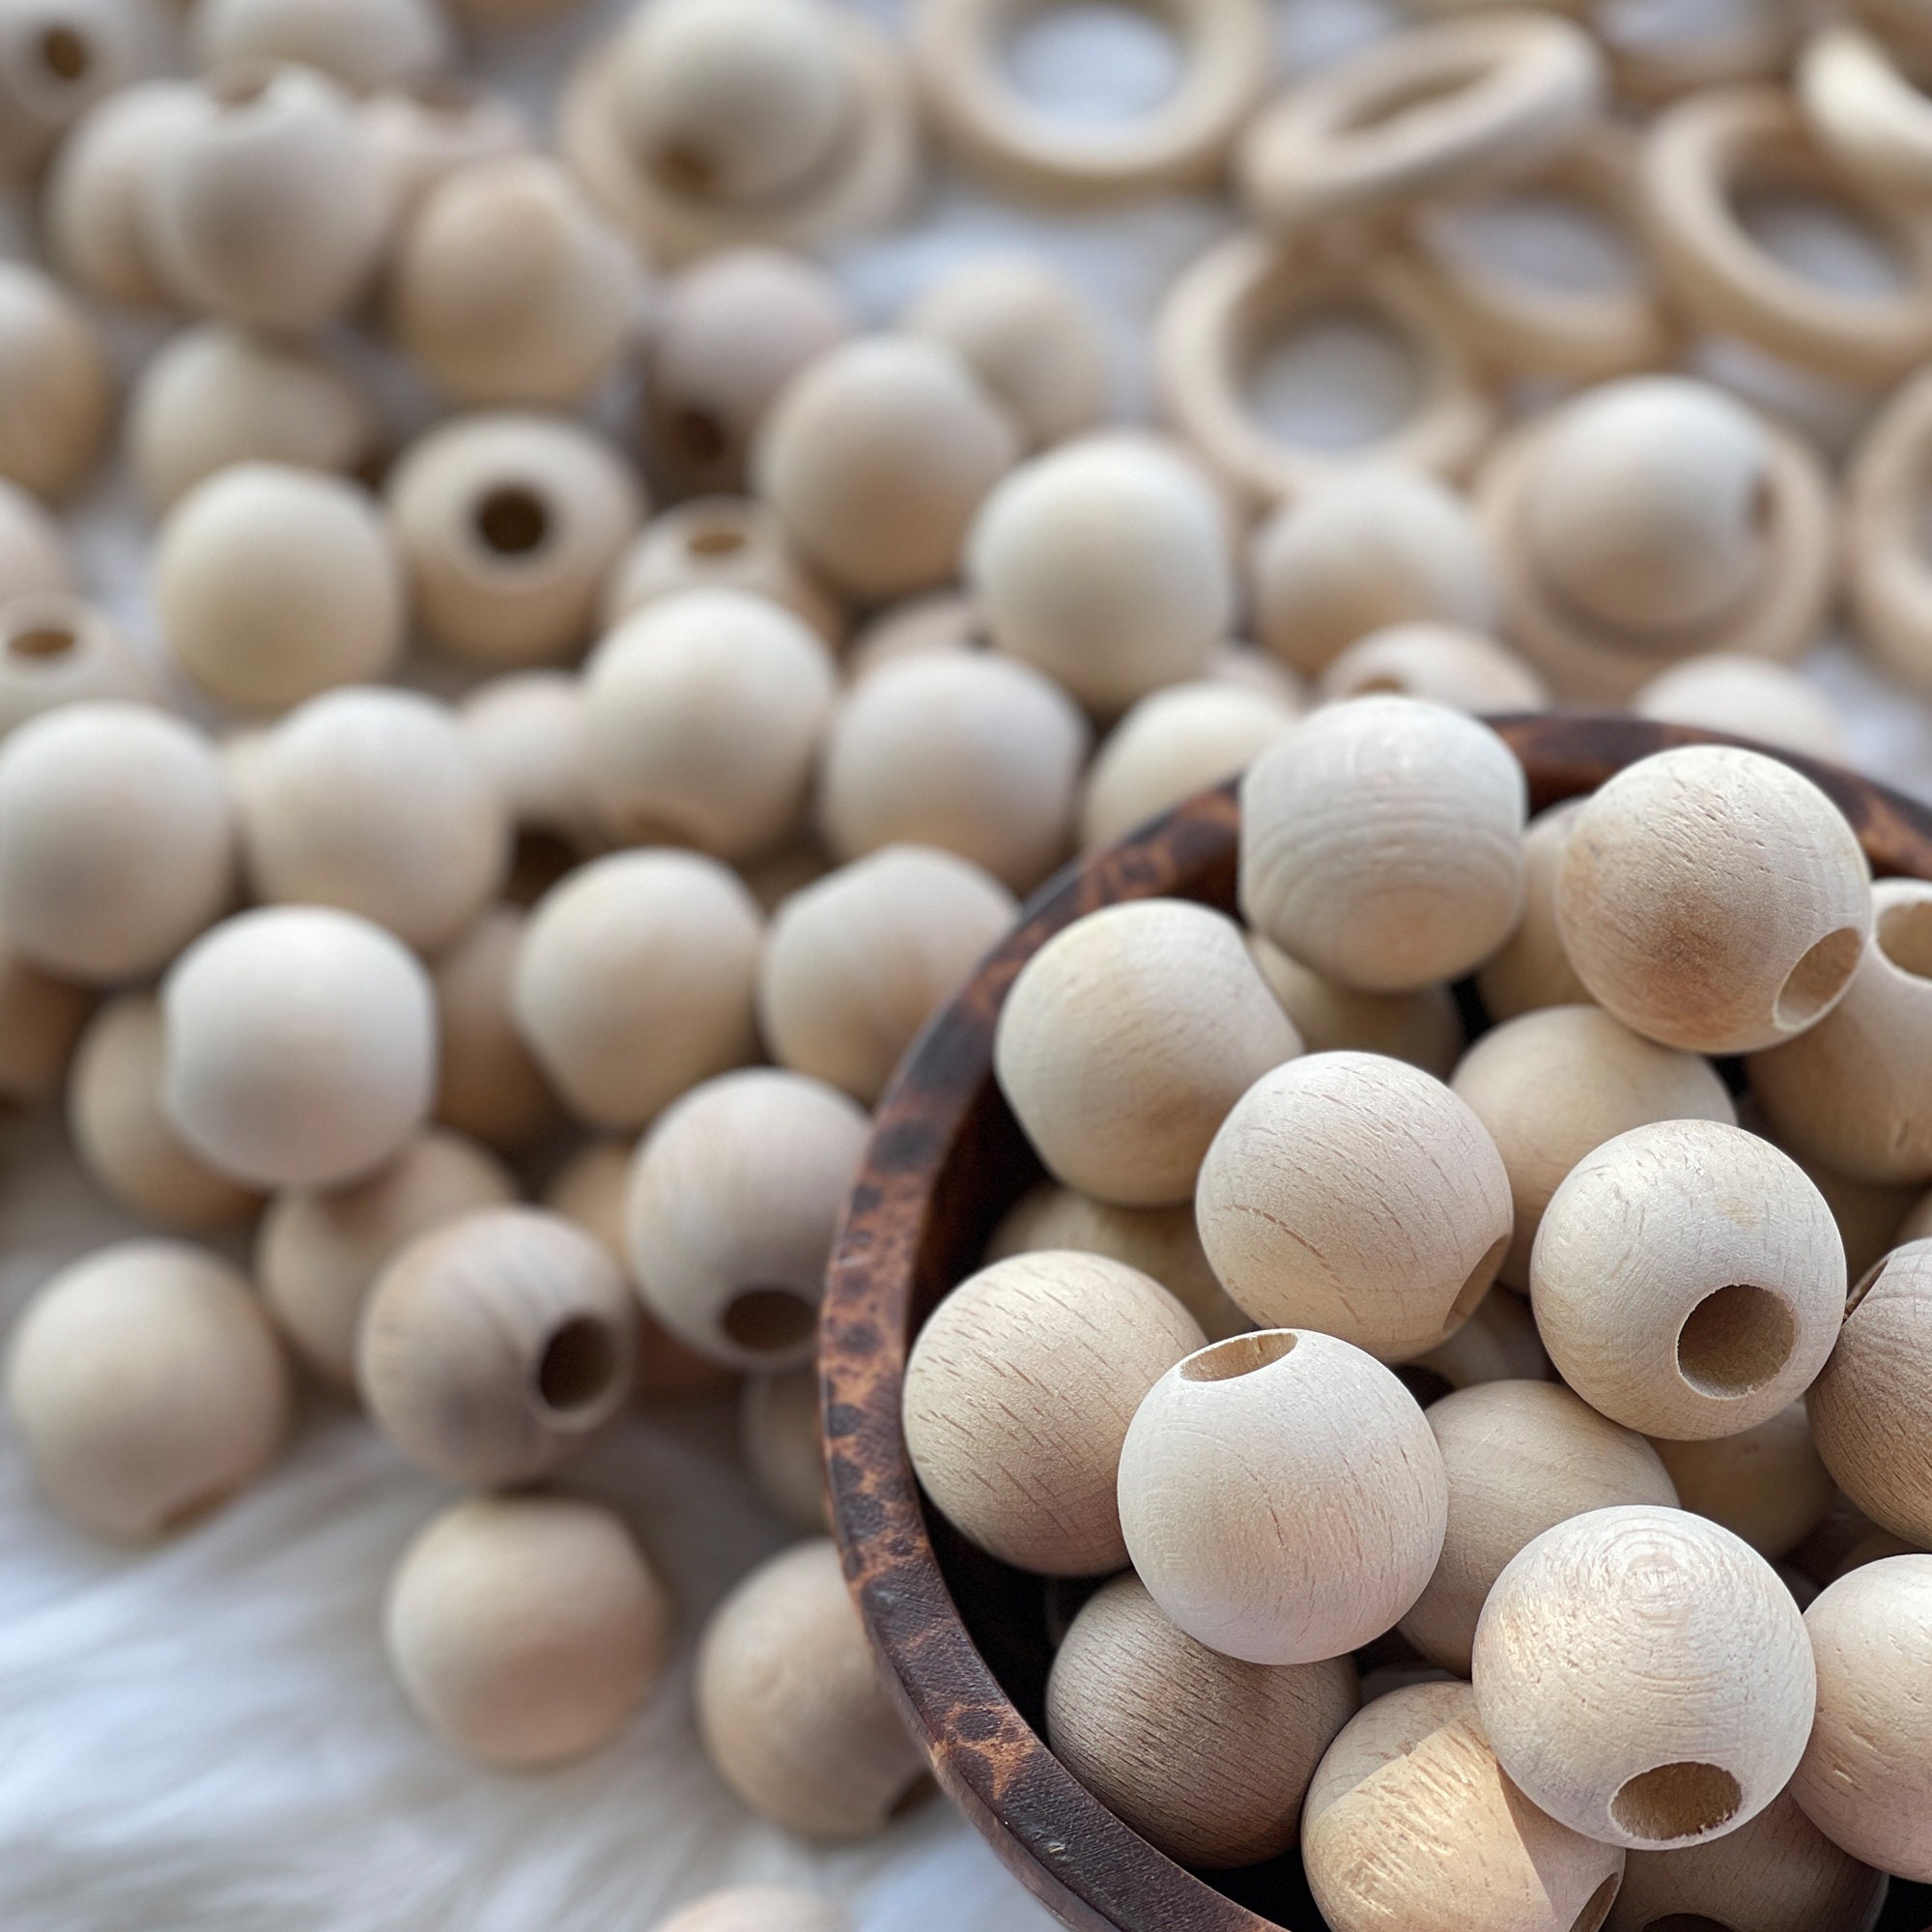 wholesale 100 piece 30mm Large Round Wood Beads - unfinished wood - beads  craft - round ball beads -10mm Big Hole Middle - unfinished